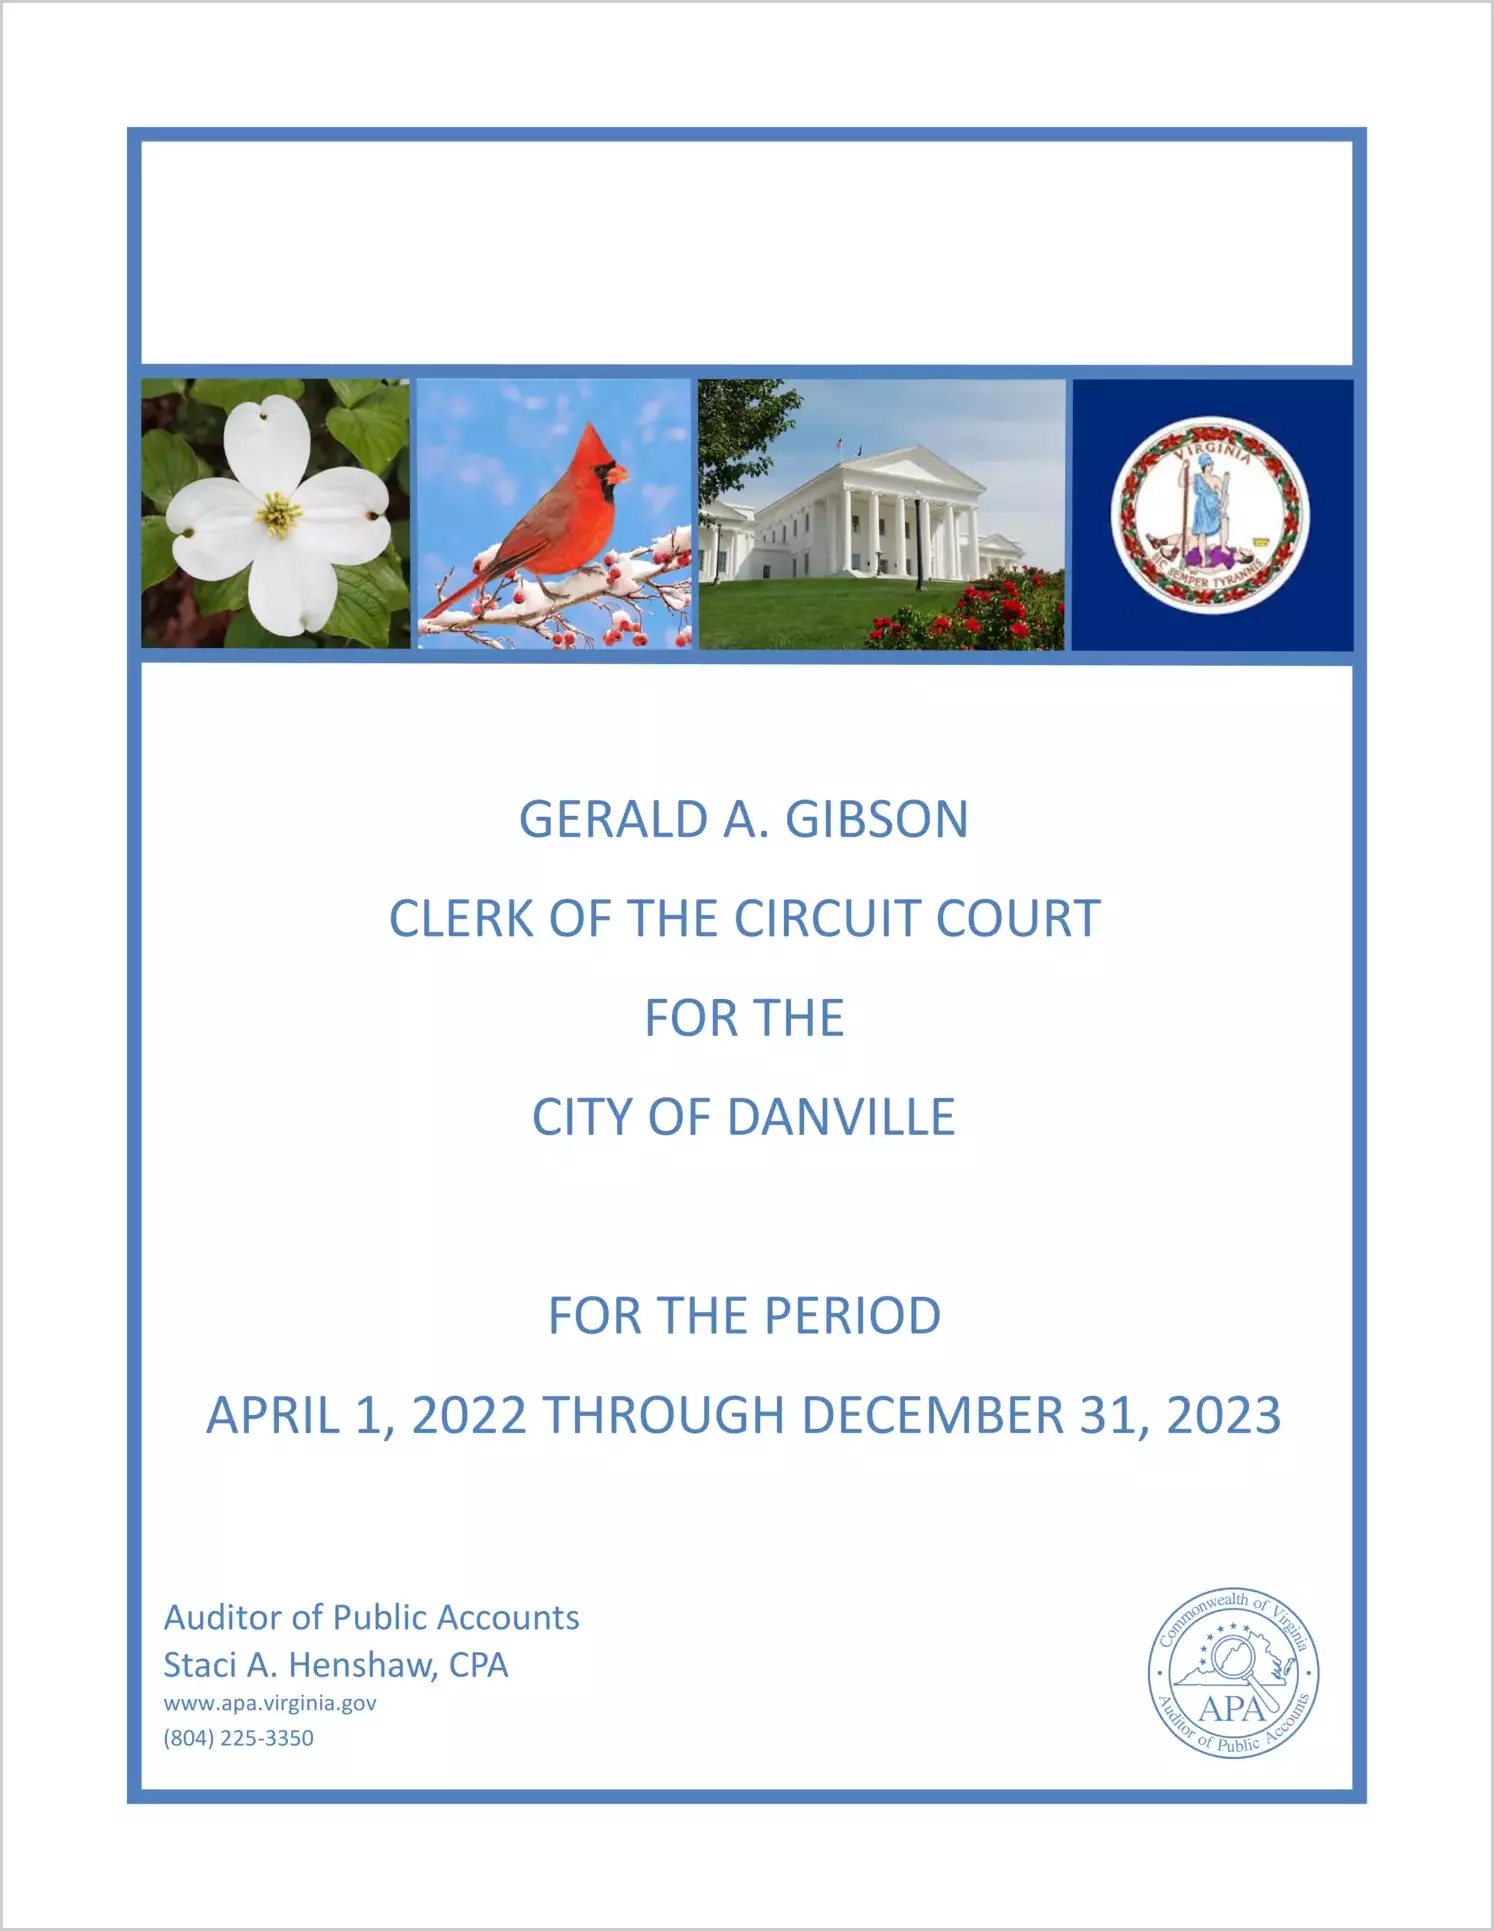 Clerk of the Circuit Court for the City of Danville for the period April 1, 2022 through December 31, 2023